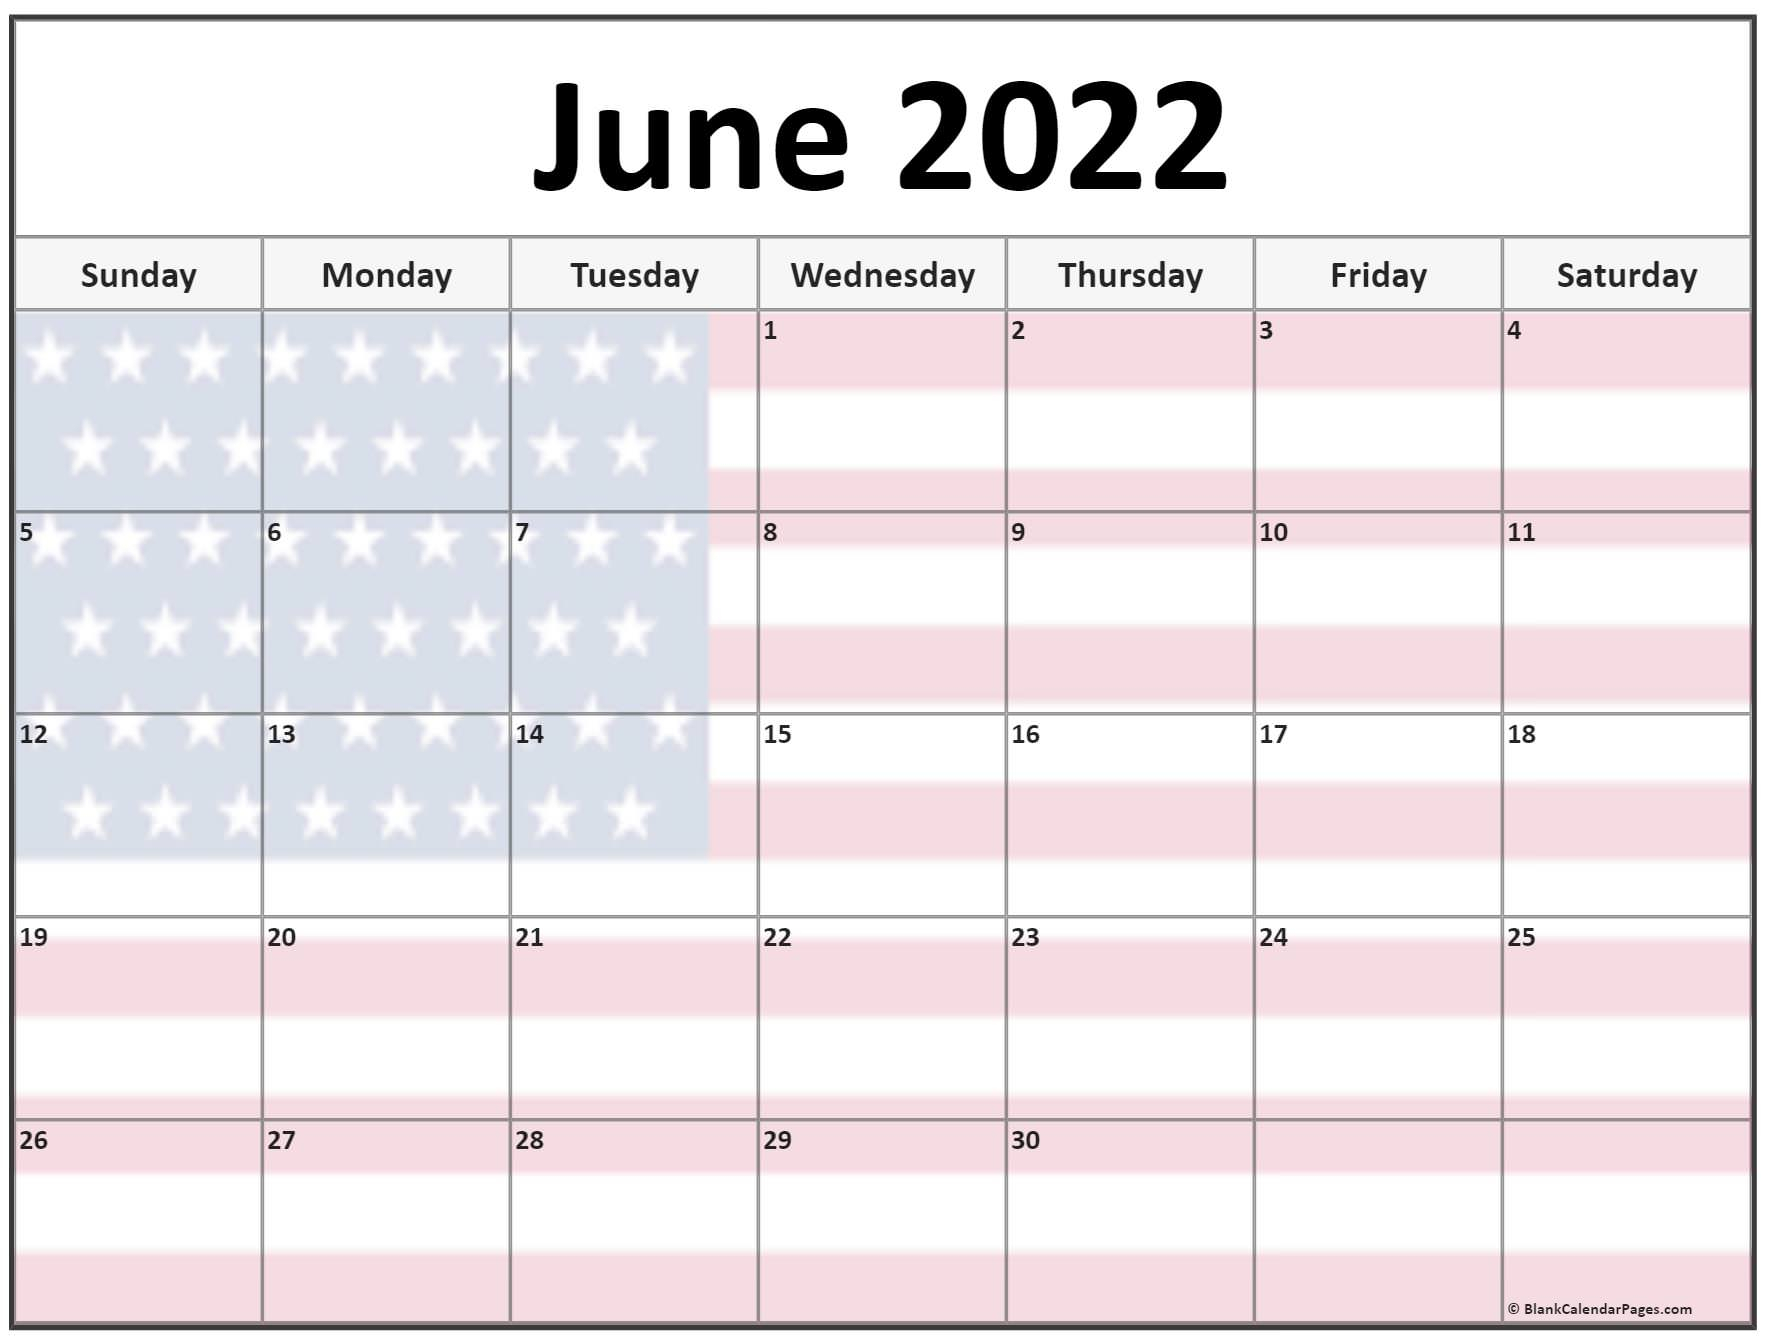 Collection Of June 2022 Photo Calendars With Image Filters.